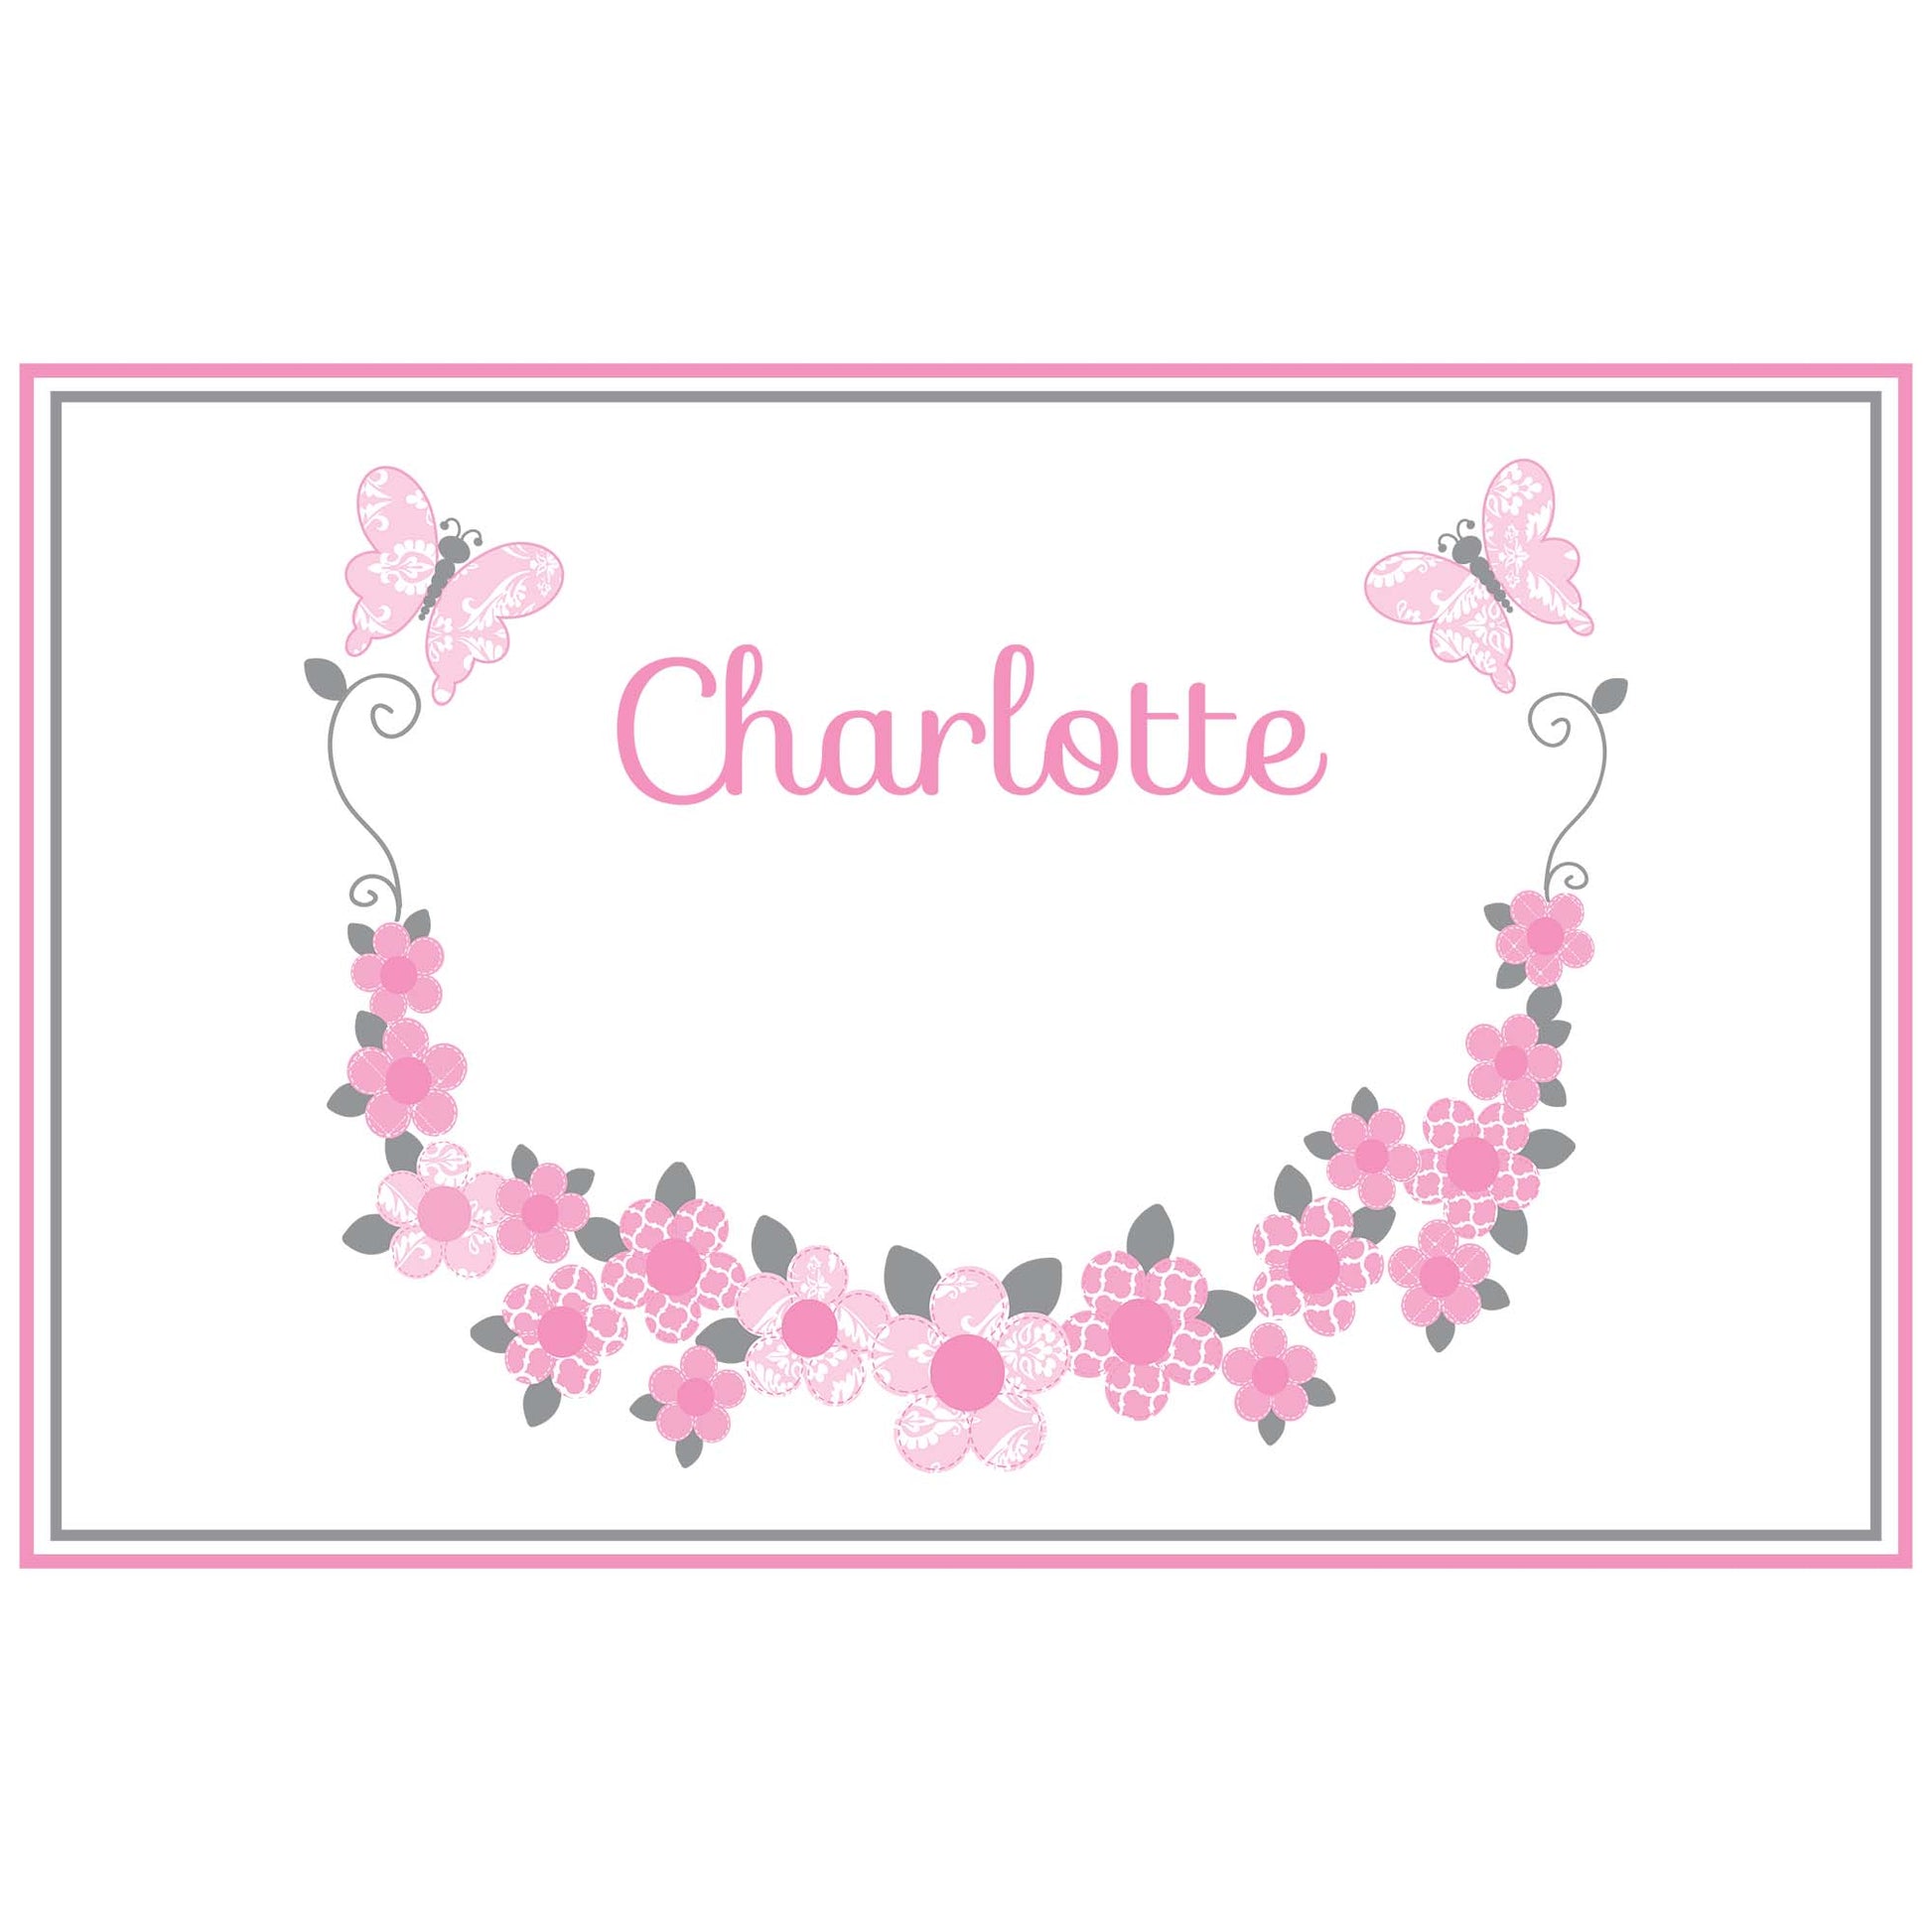 Personalized Placemat with Pink and Gray Butterflies design